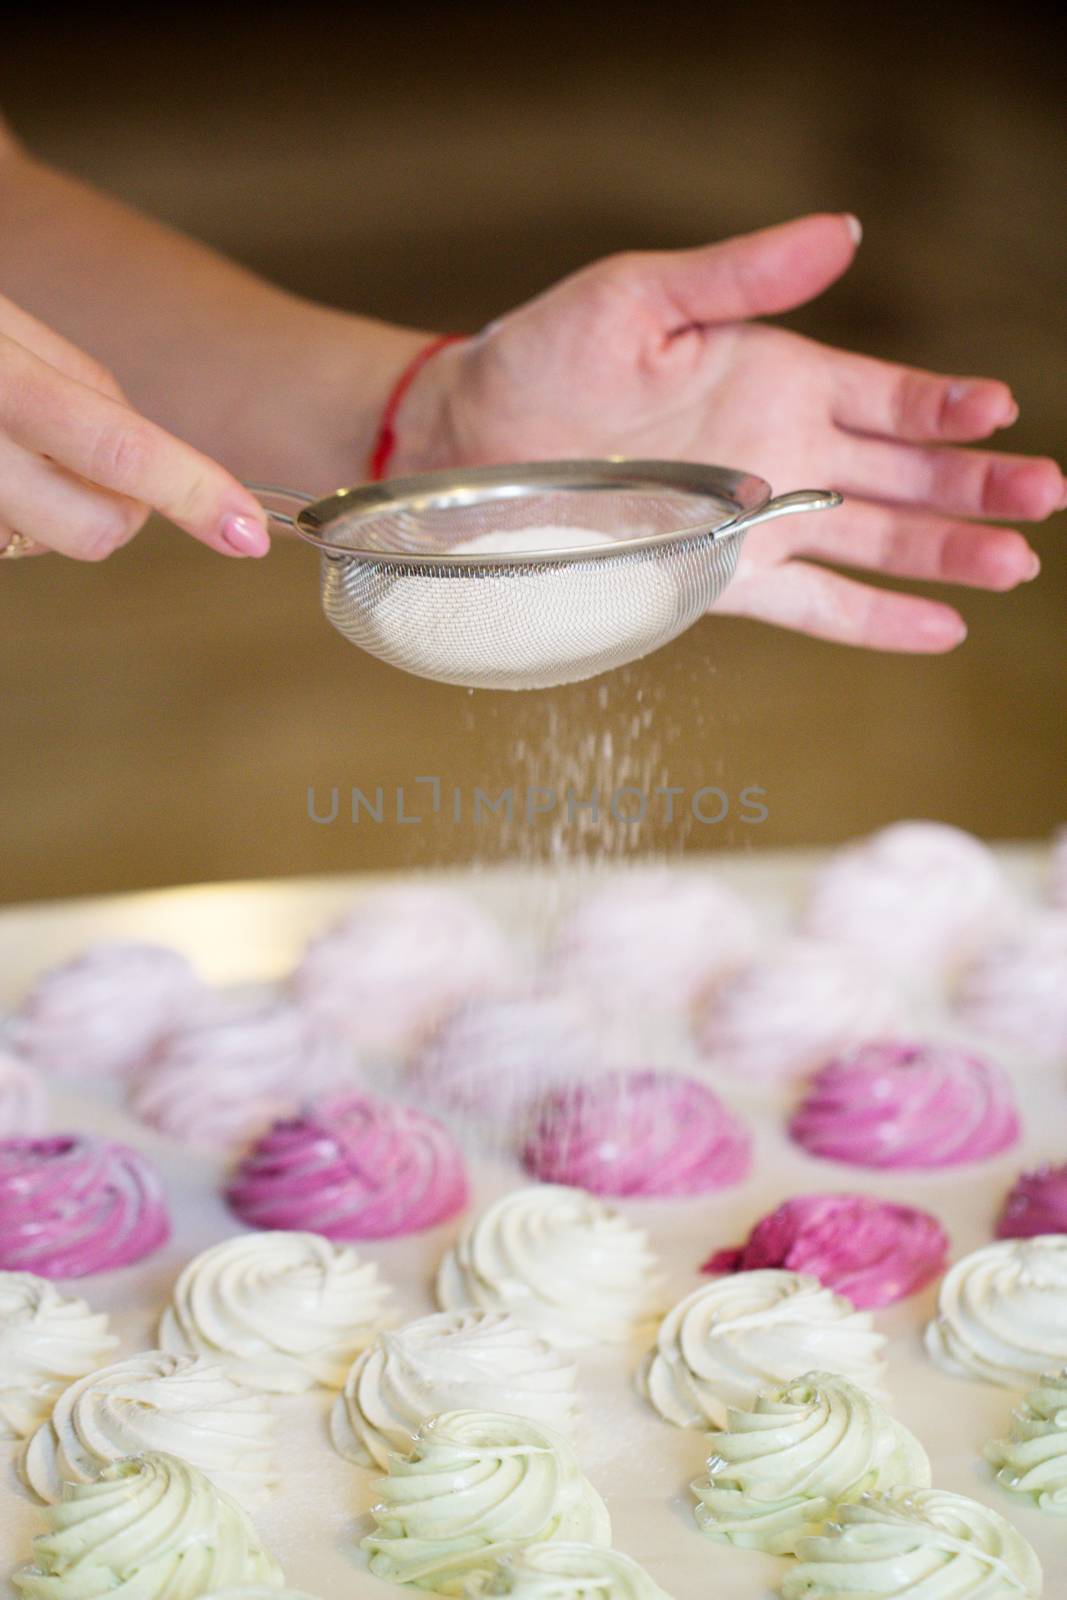 Woman's hands sprinkling with icing sugar a zephyr  using sieve. Confectioner sprinkles powdered sugar on marshmallow